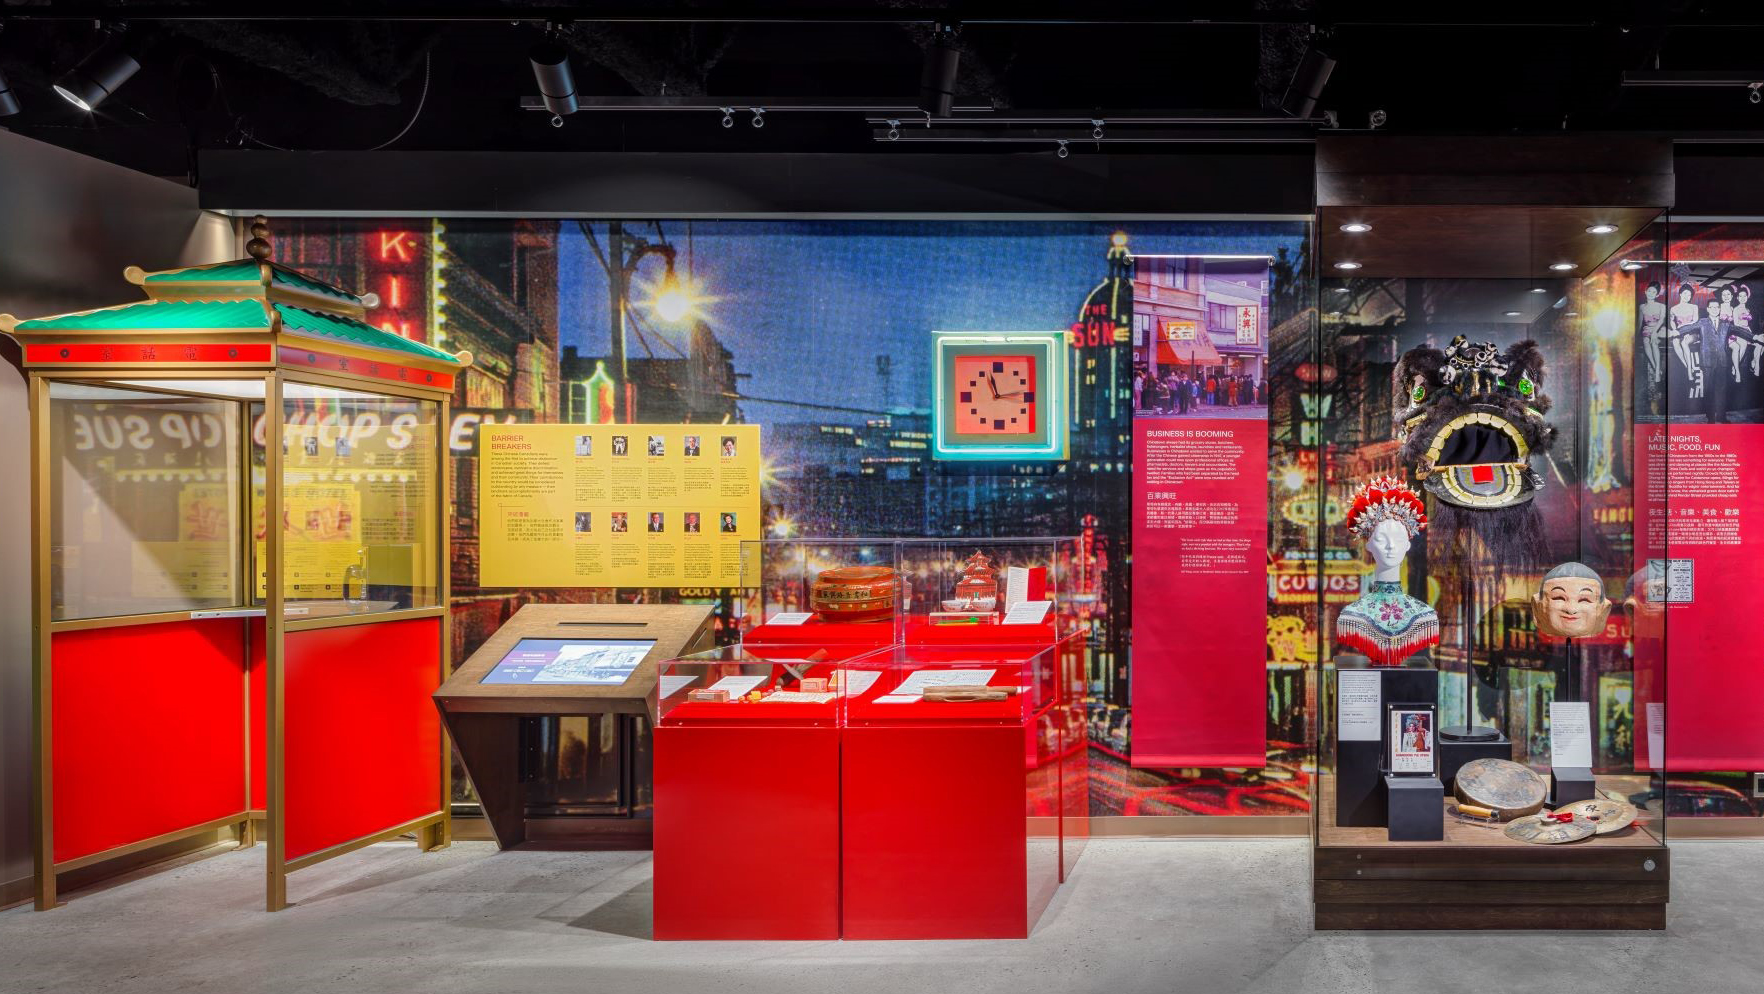 A bright and colourful section of the Chinatown Storytelling Centre's main exhibit